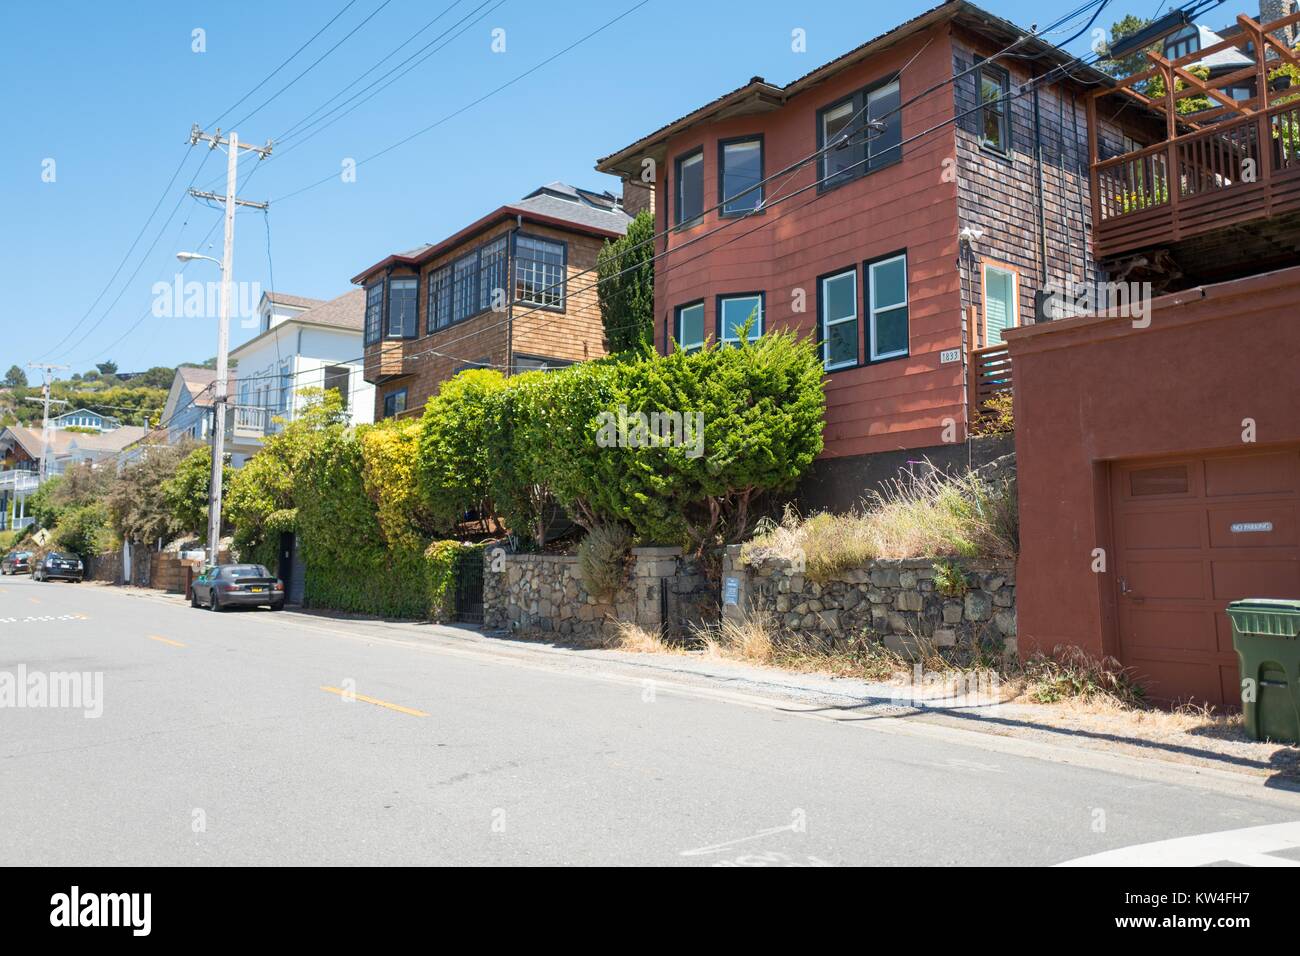 Homes built on a hill on Mar W street above Tiburon, California, 2016. Real estate prices in Tiburon are among the highest in the San Francisco Bay Area, as many homes have views of the city of San Francisco. Stock Photo